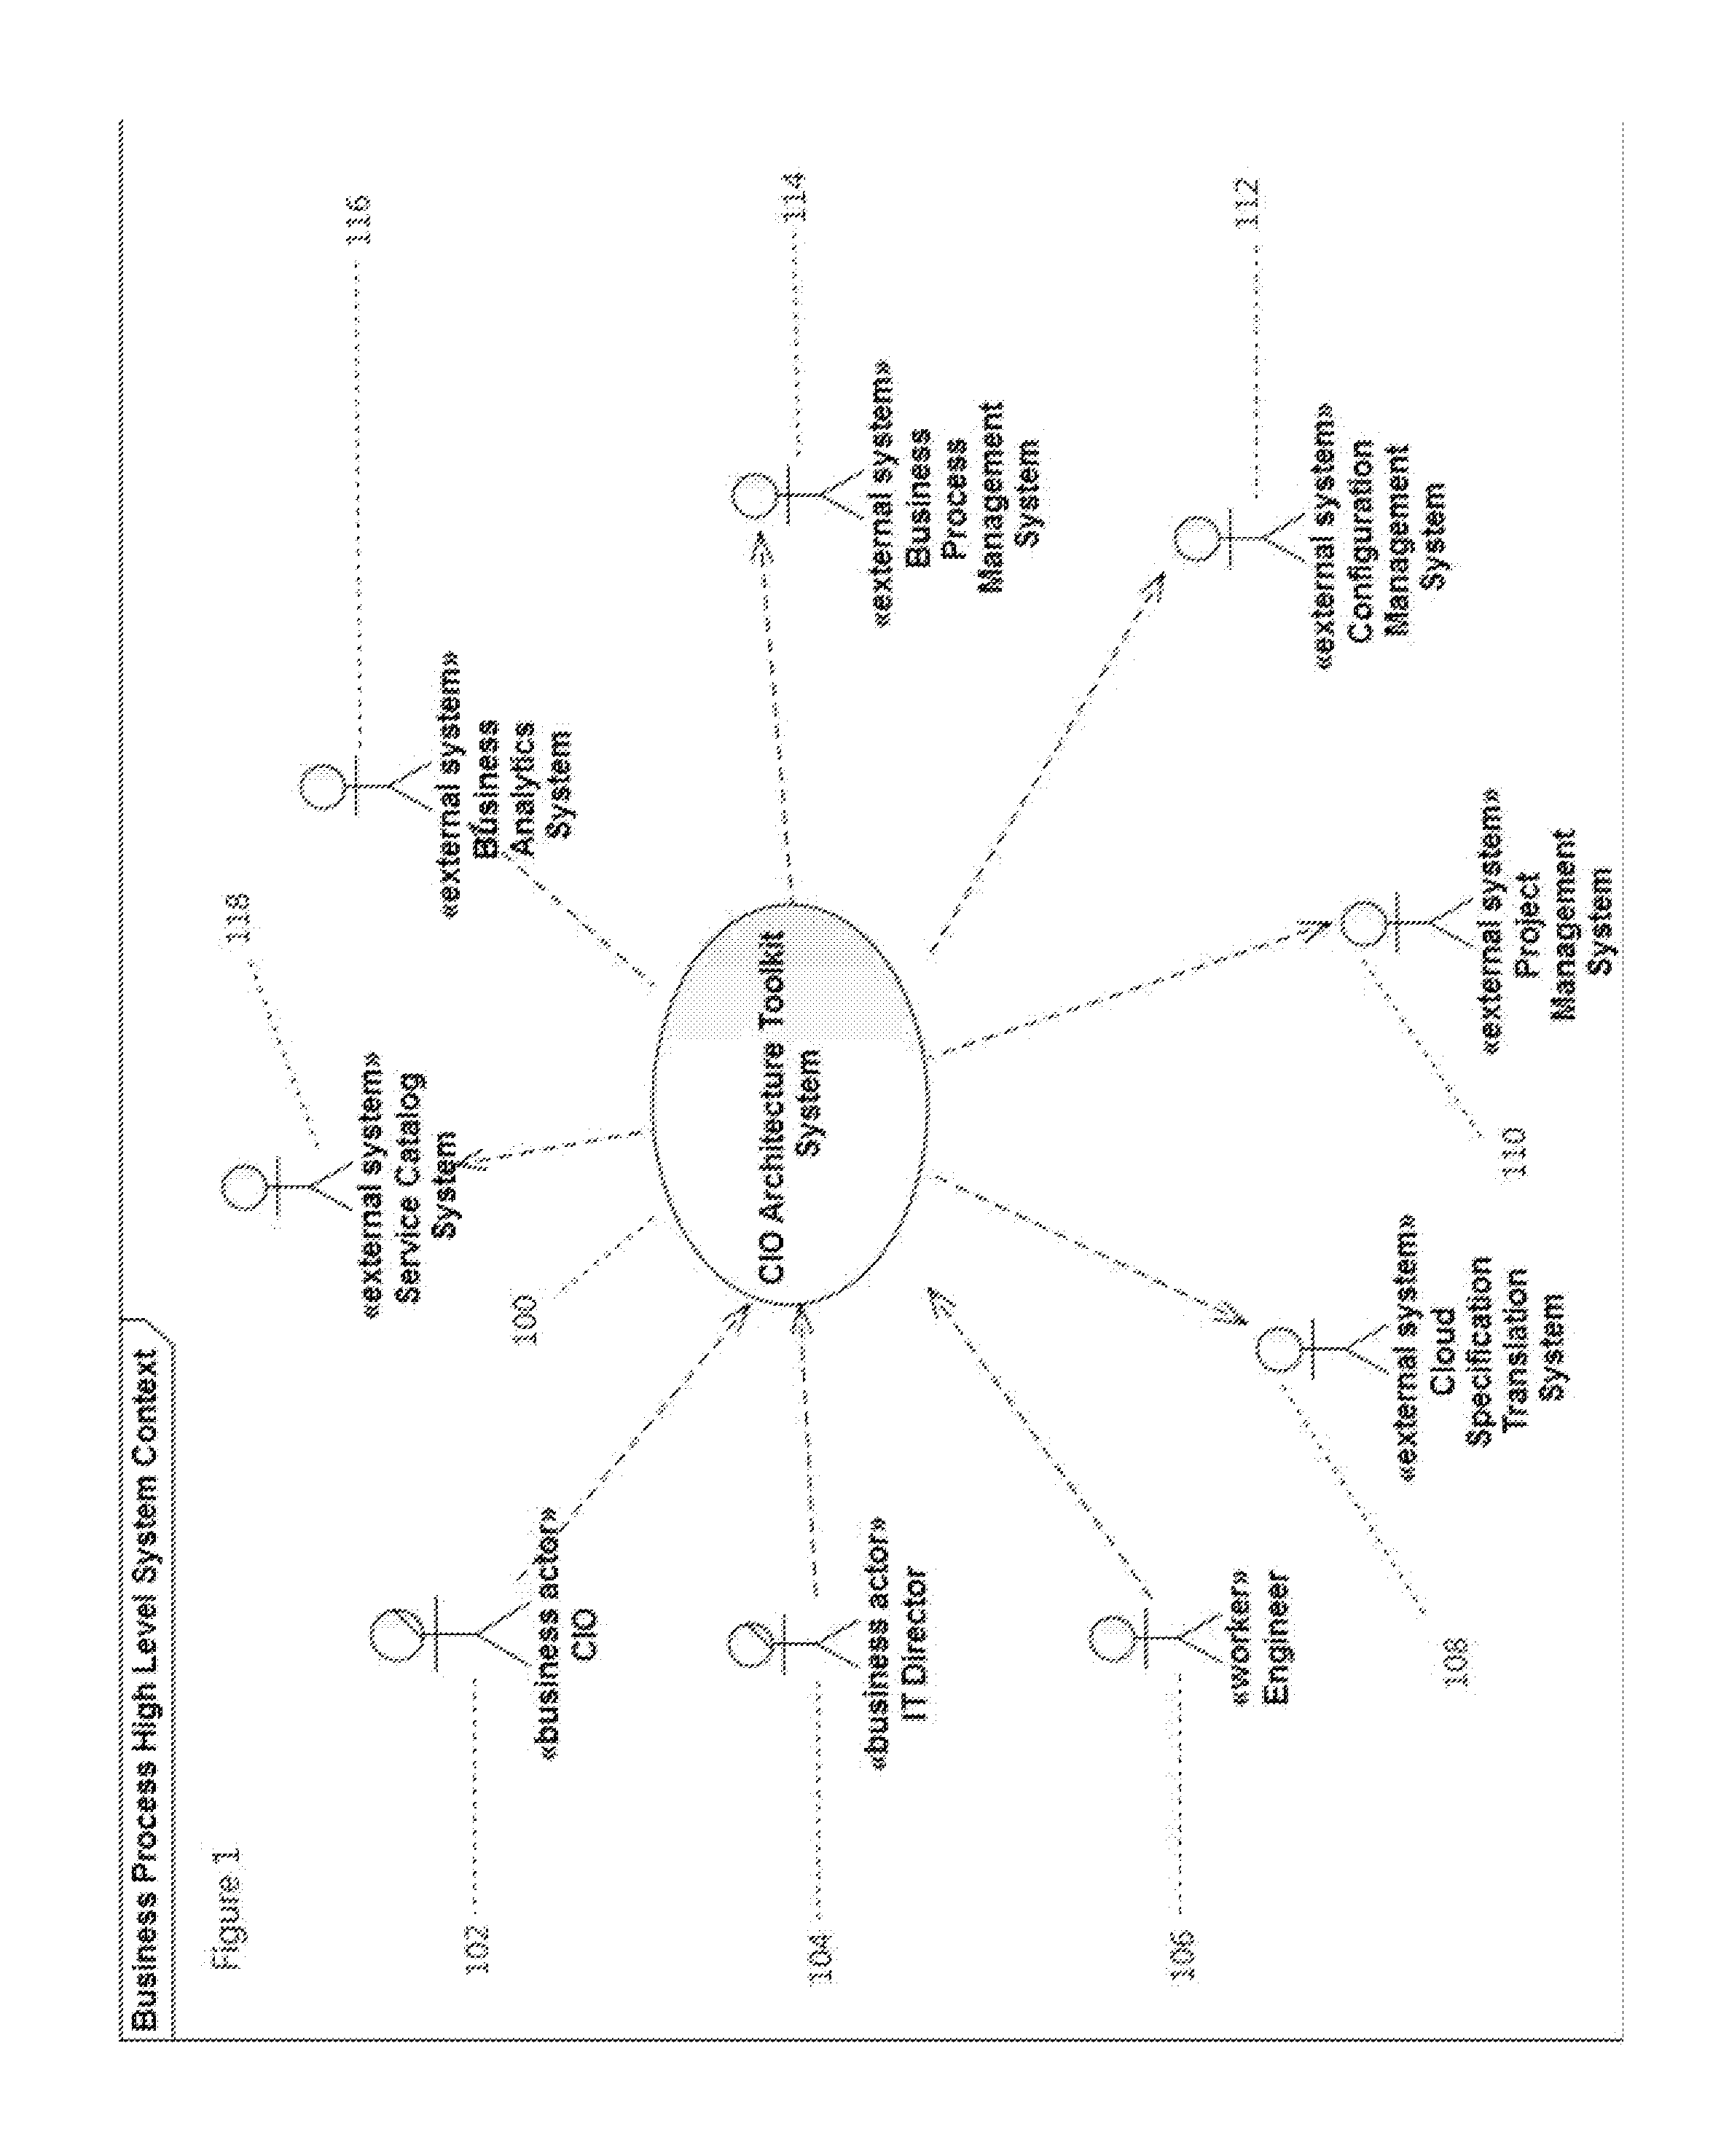 Method of generating a computer architecture representation in a reusable syntax and grammar